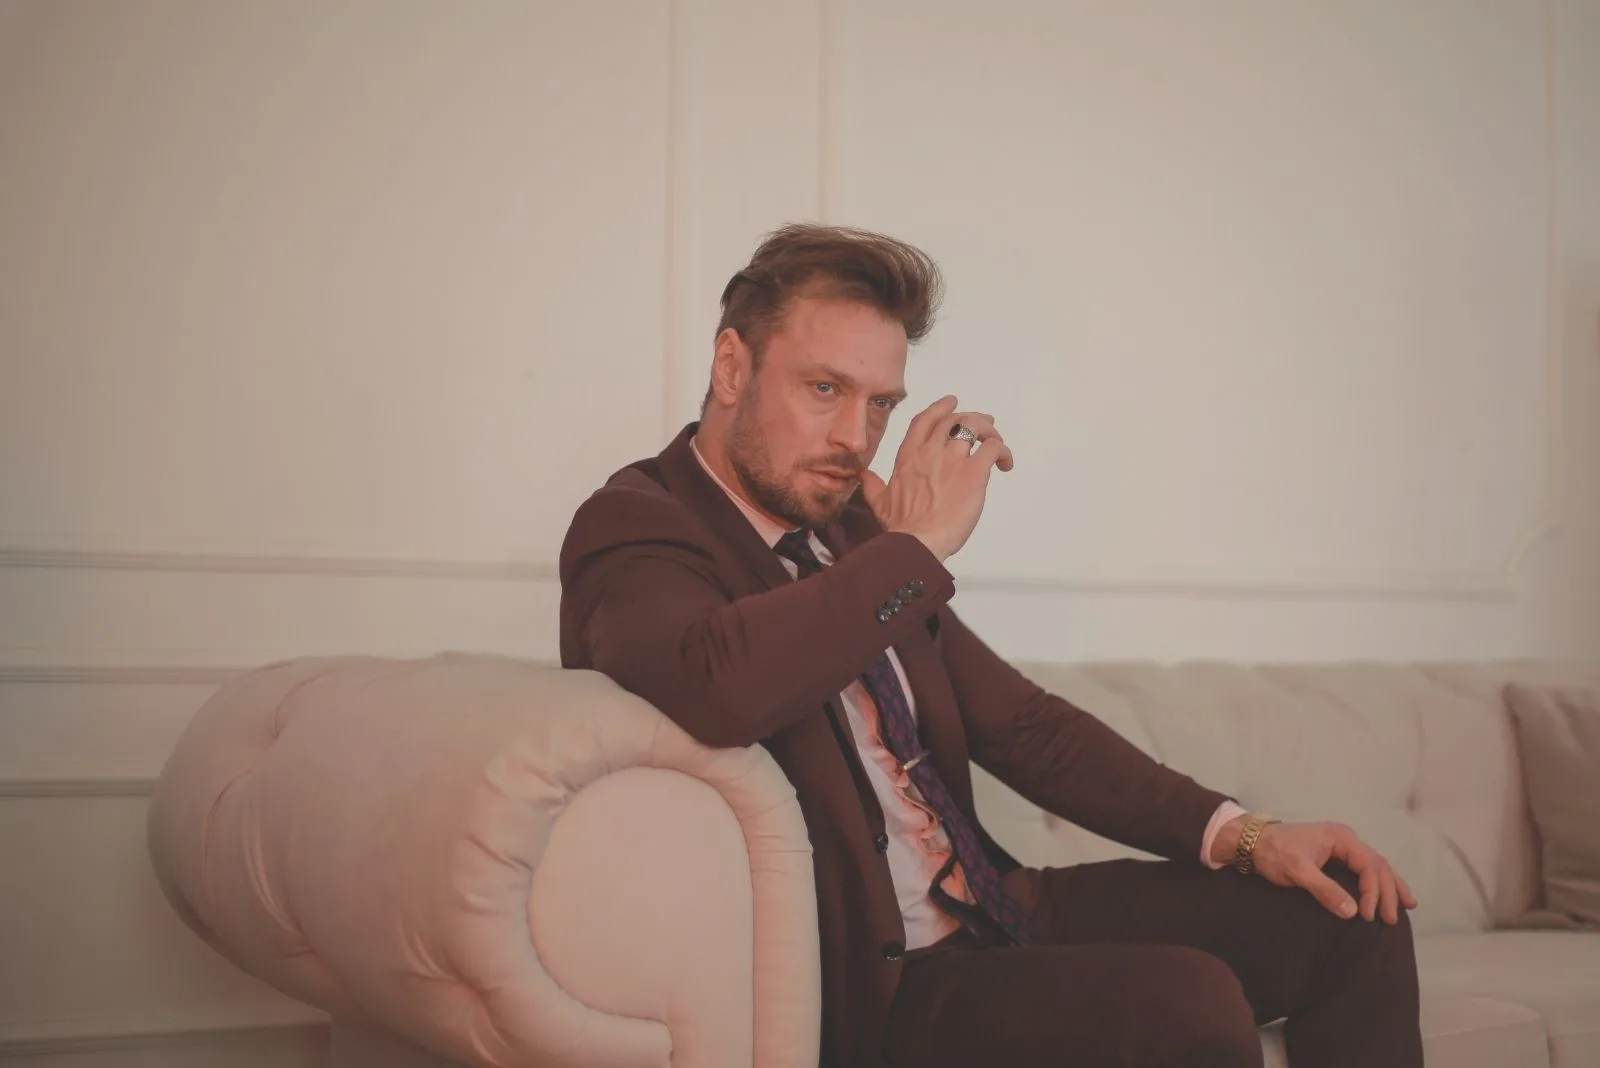 pensive man wearing a suit sitting on the sofa